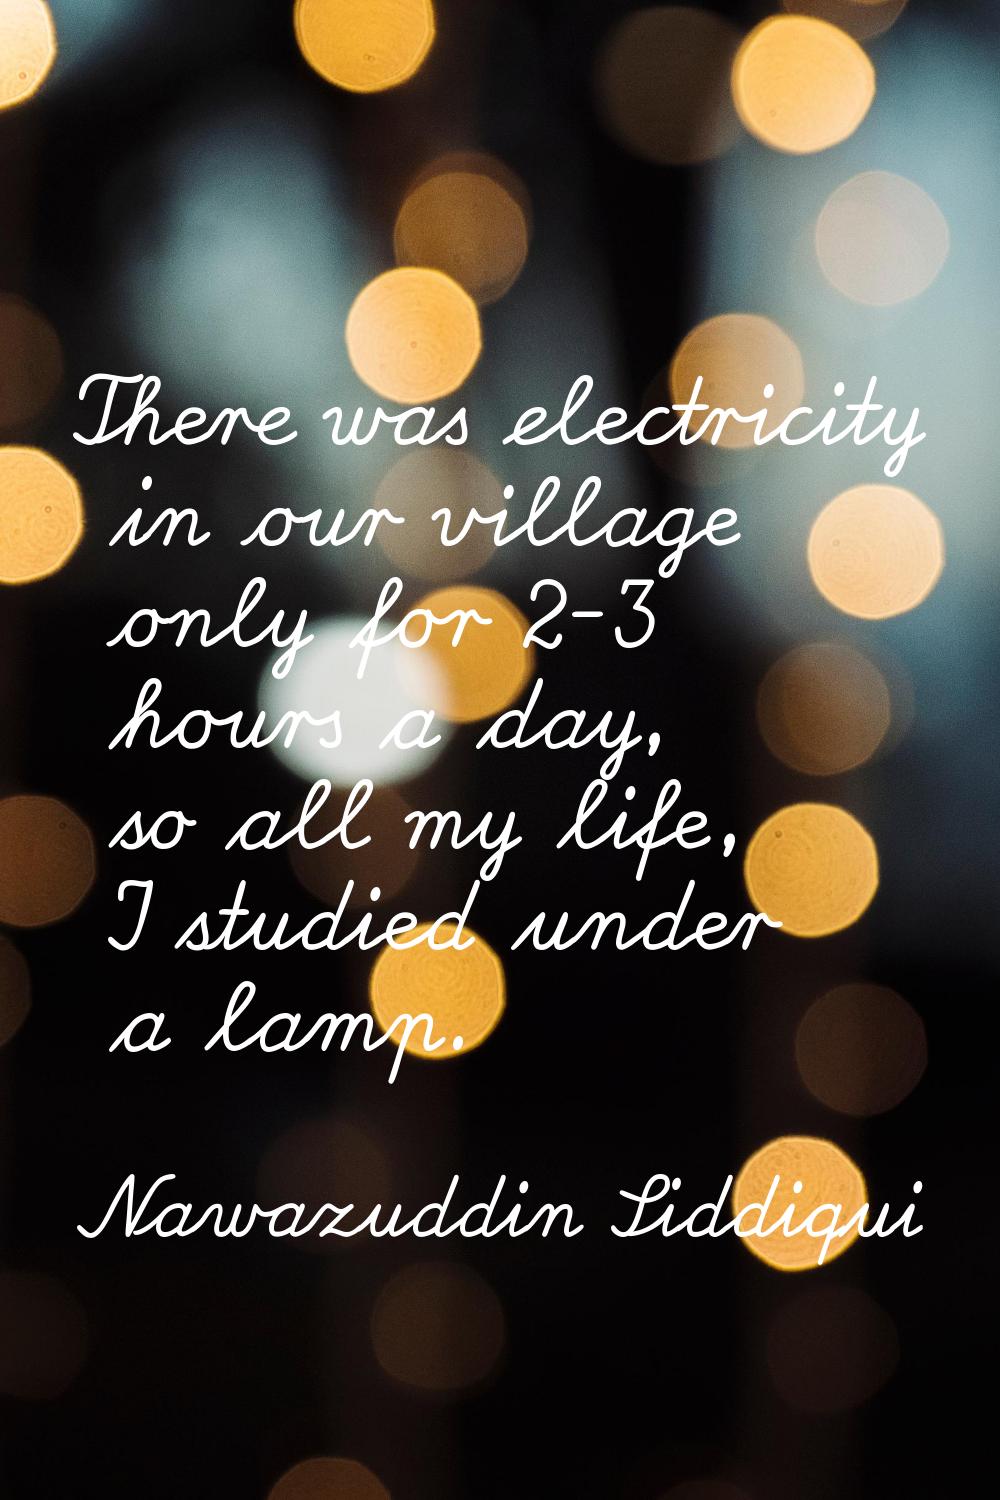 There was electricity in our village only for 2-3 hours a day, so all my life, I studied under a la